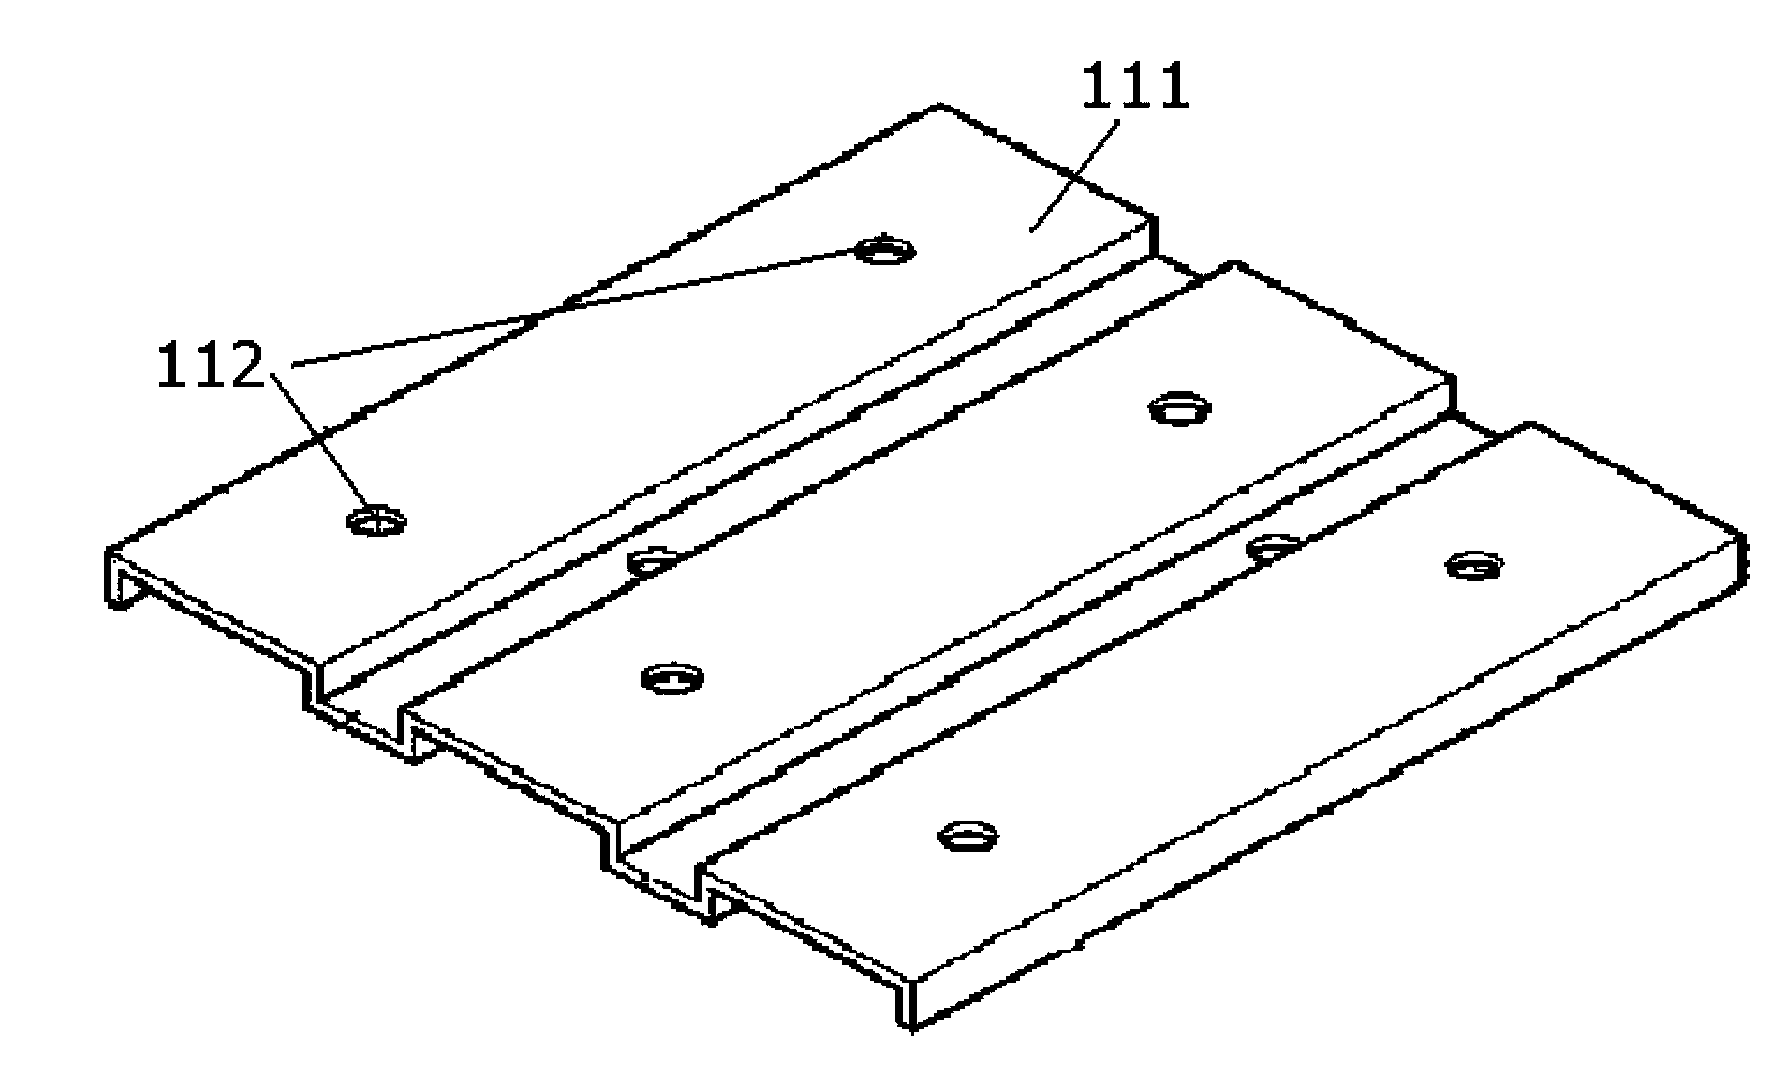 Substrate cassette device